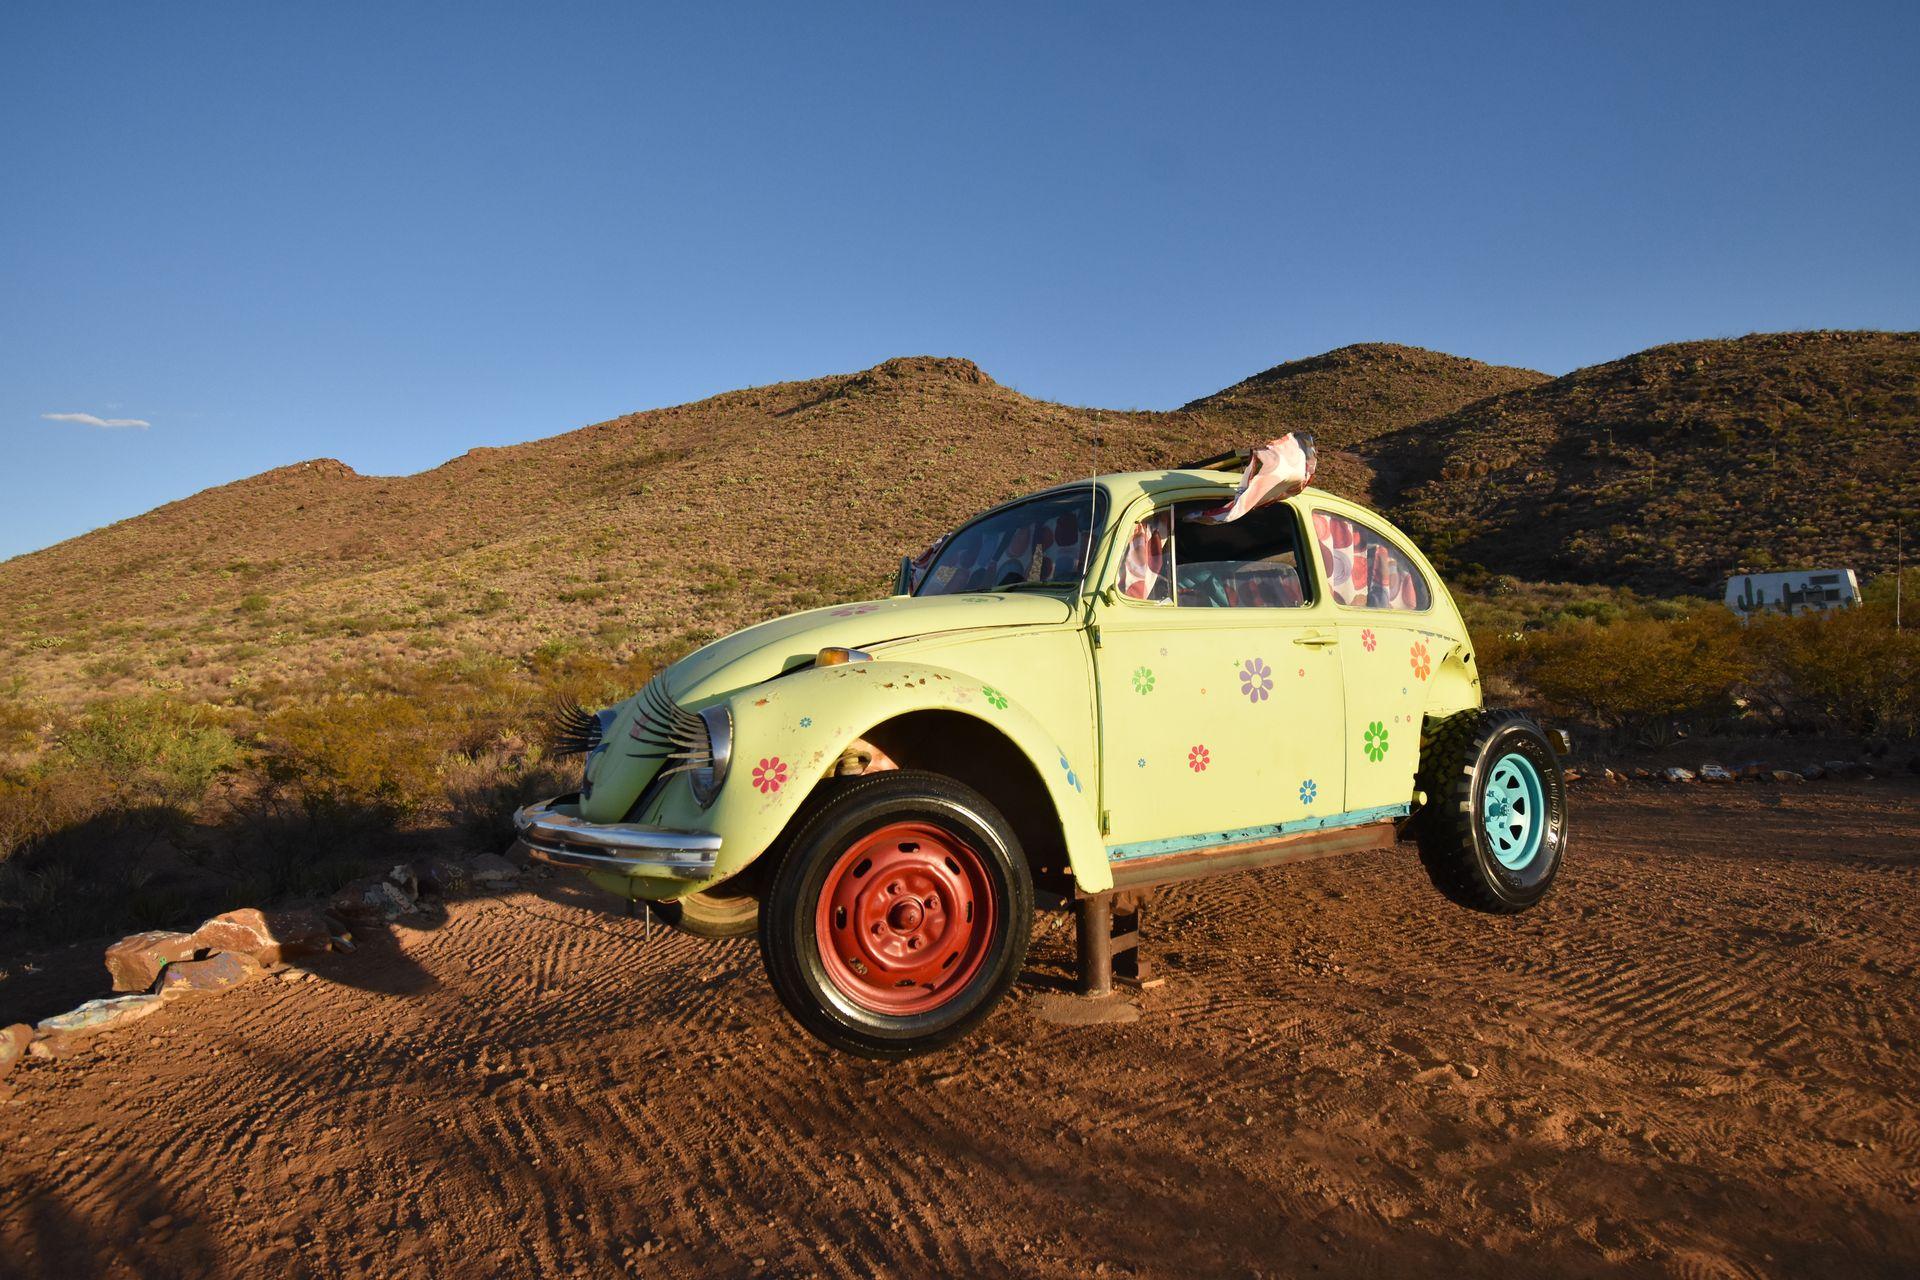 A yellow cuddle bug up on a rod with the desert in the background. There are colorful flowers on the bug and a curtain blowing out of an open window